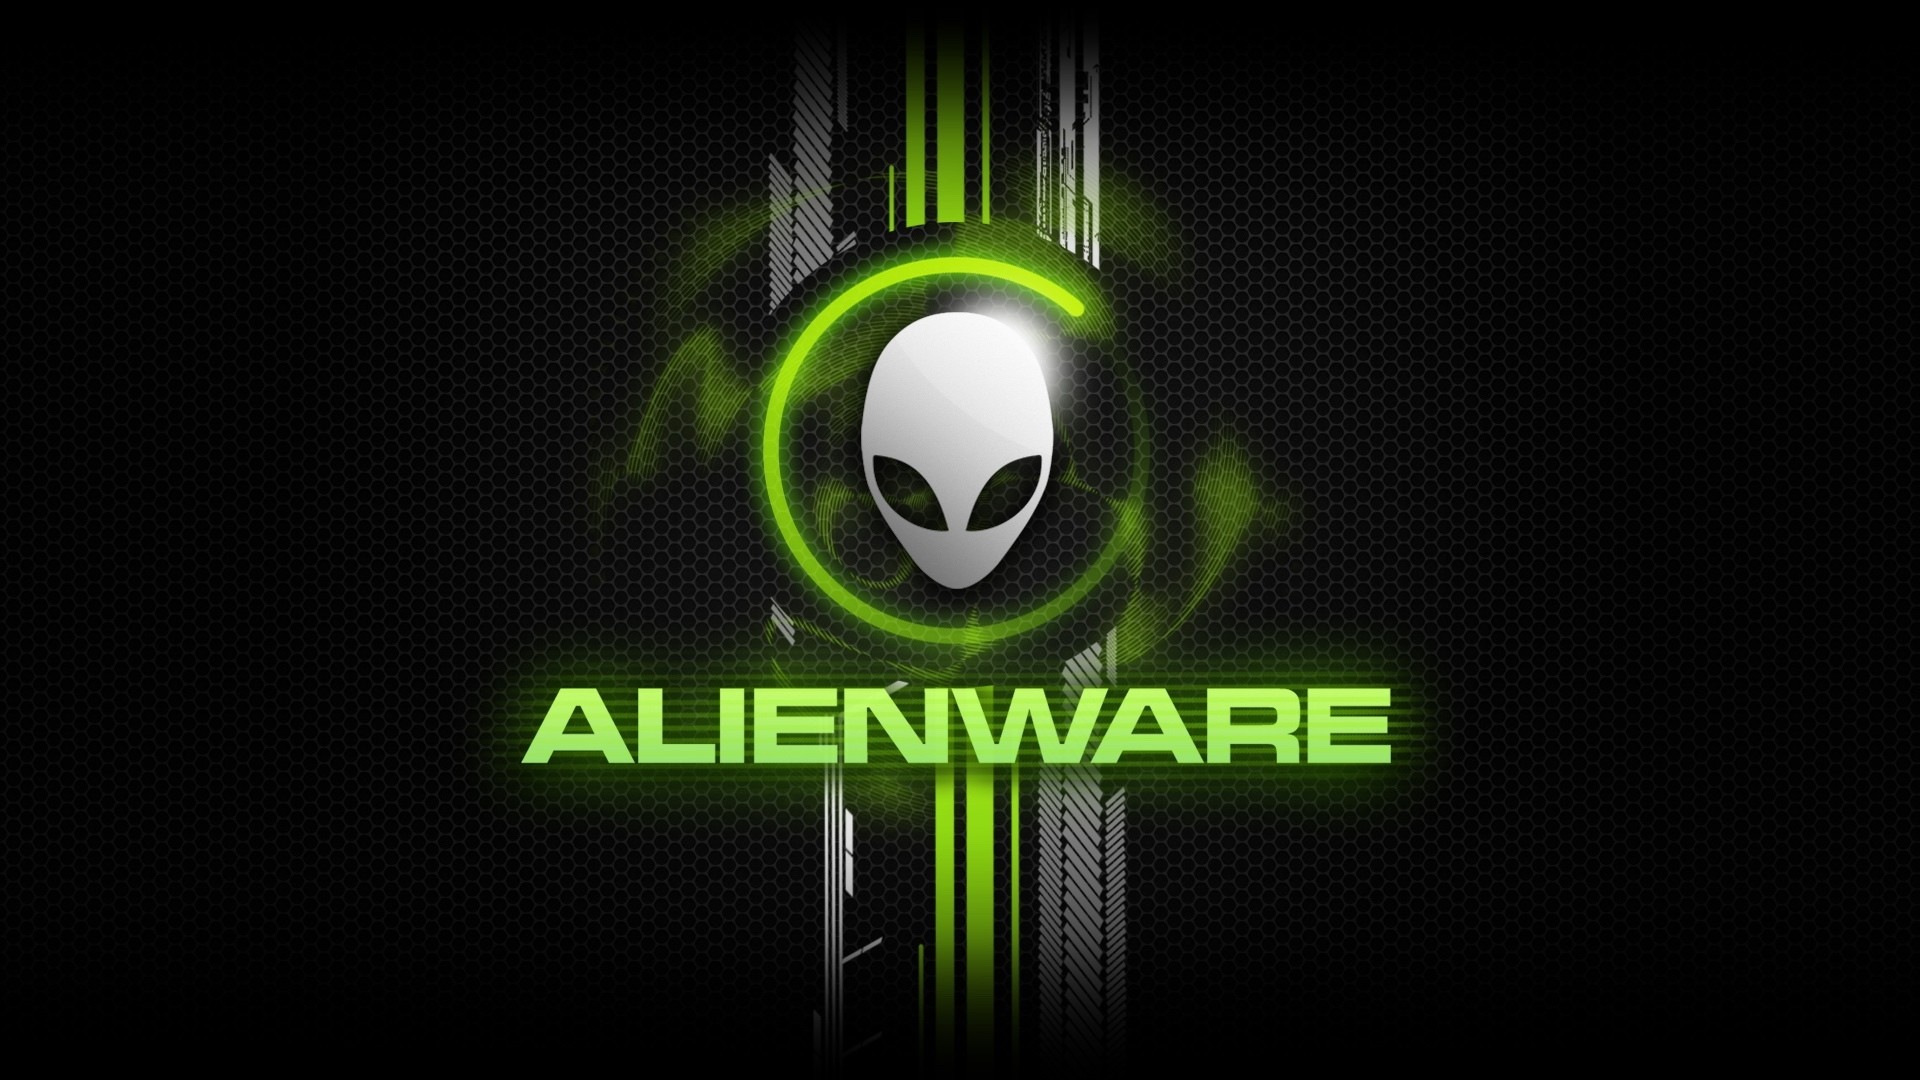 technology, alienware High Definition image